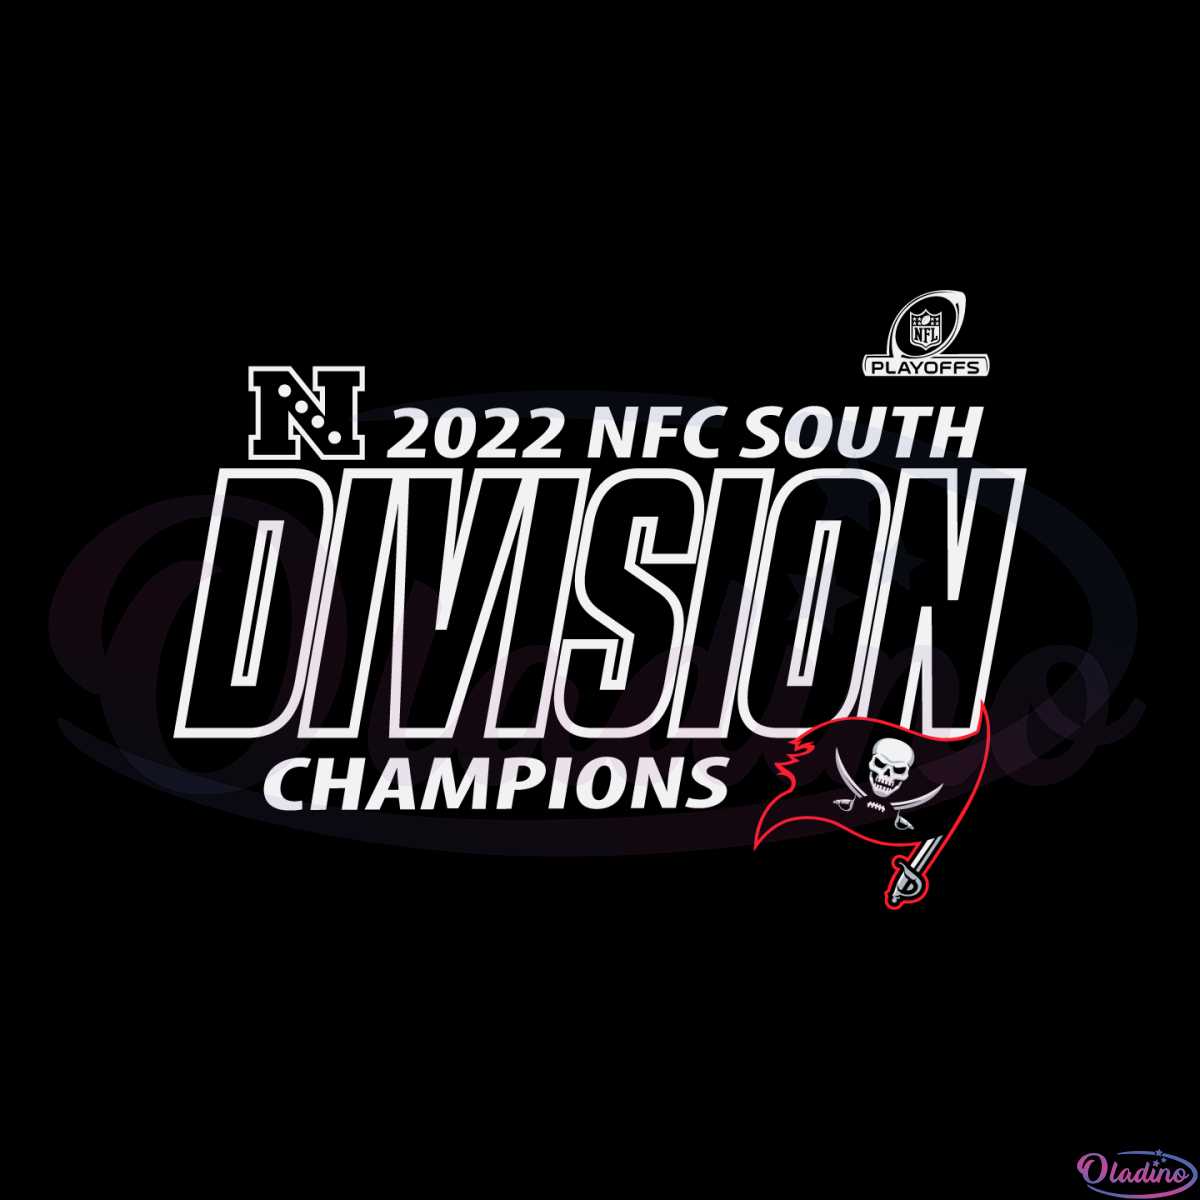 buccaneers nfc south champions